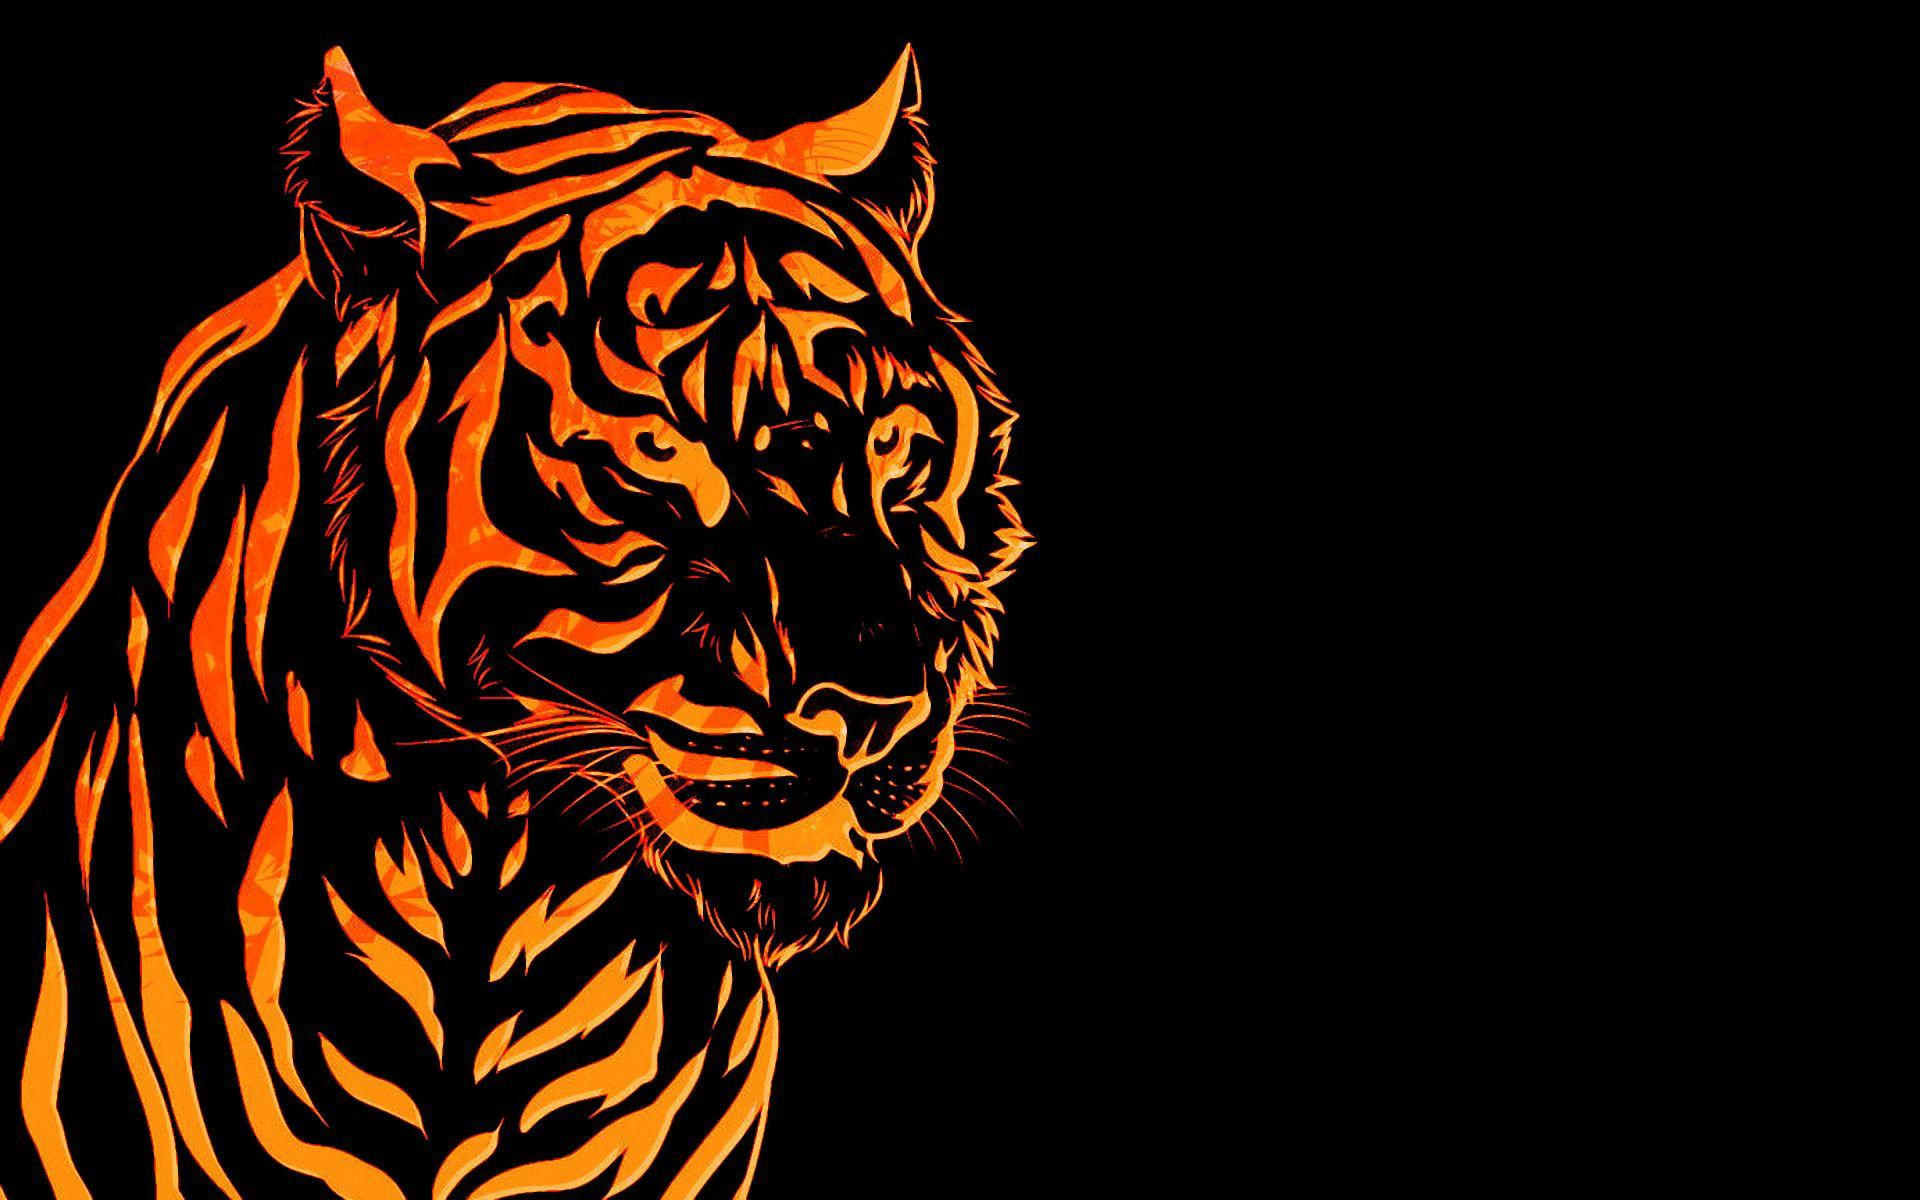 Get your Eye of the Tiger on with these ferocious wallpaper